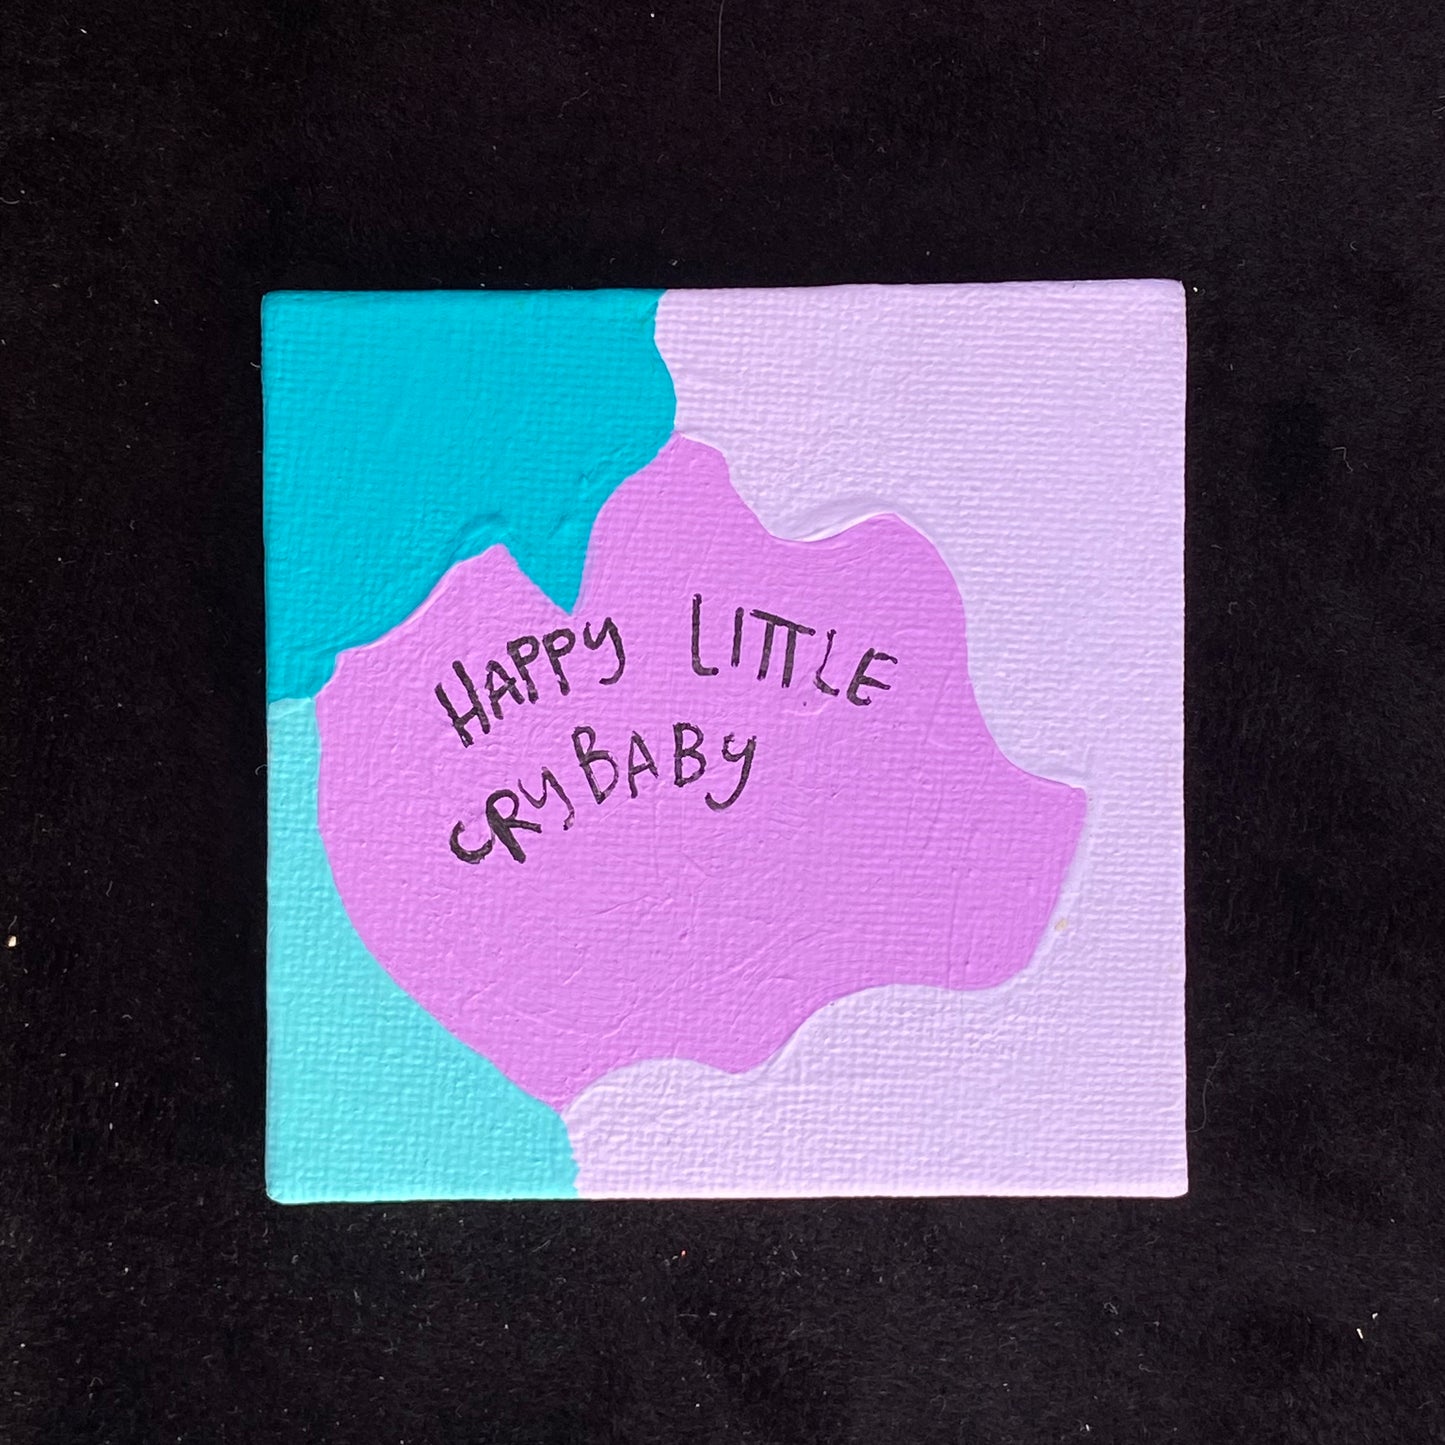 Tiny Feminist Painting Happy Little Crybaby